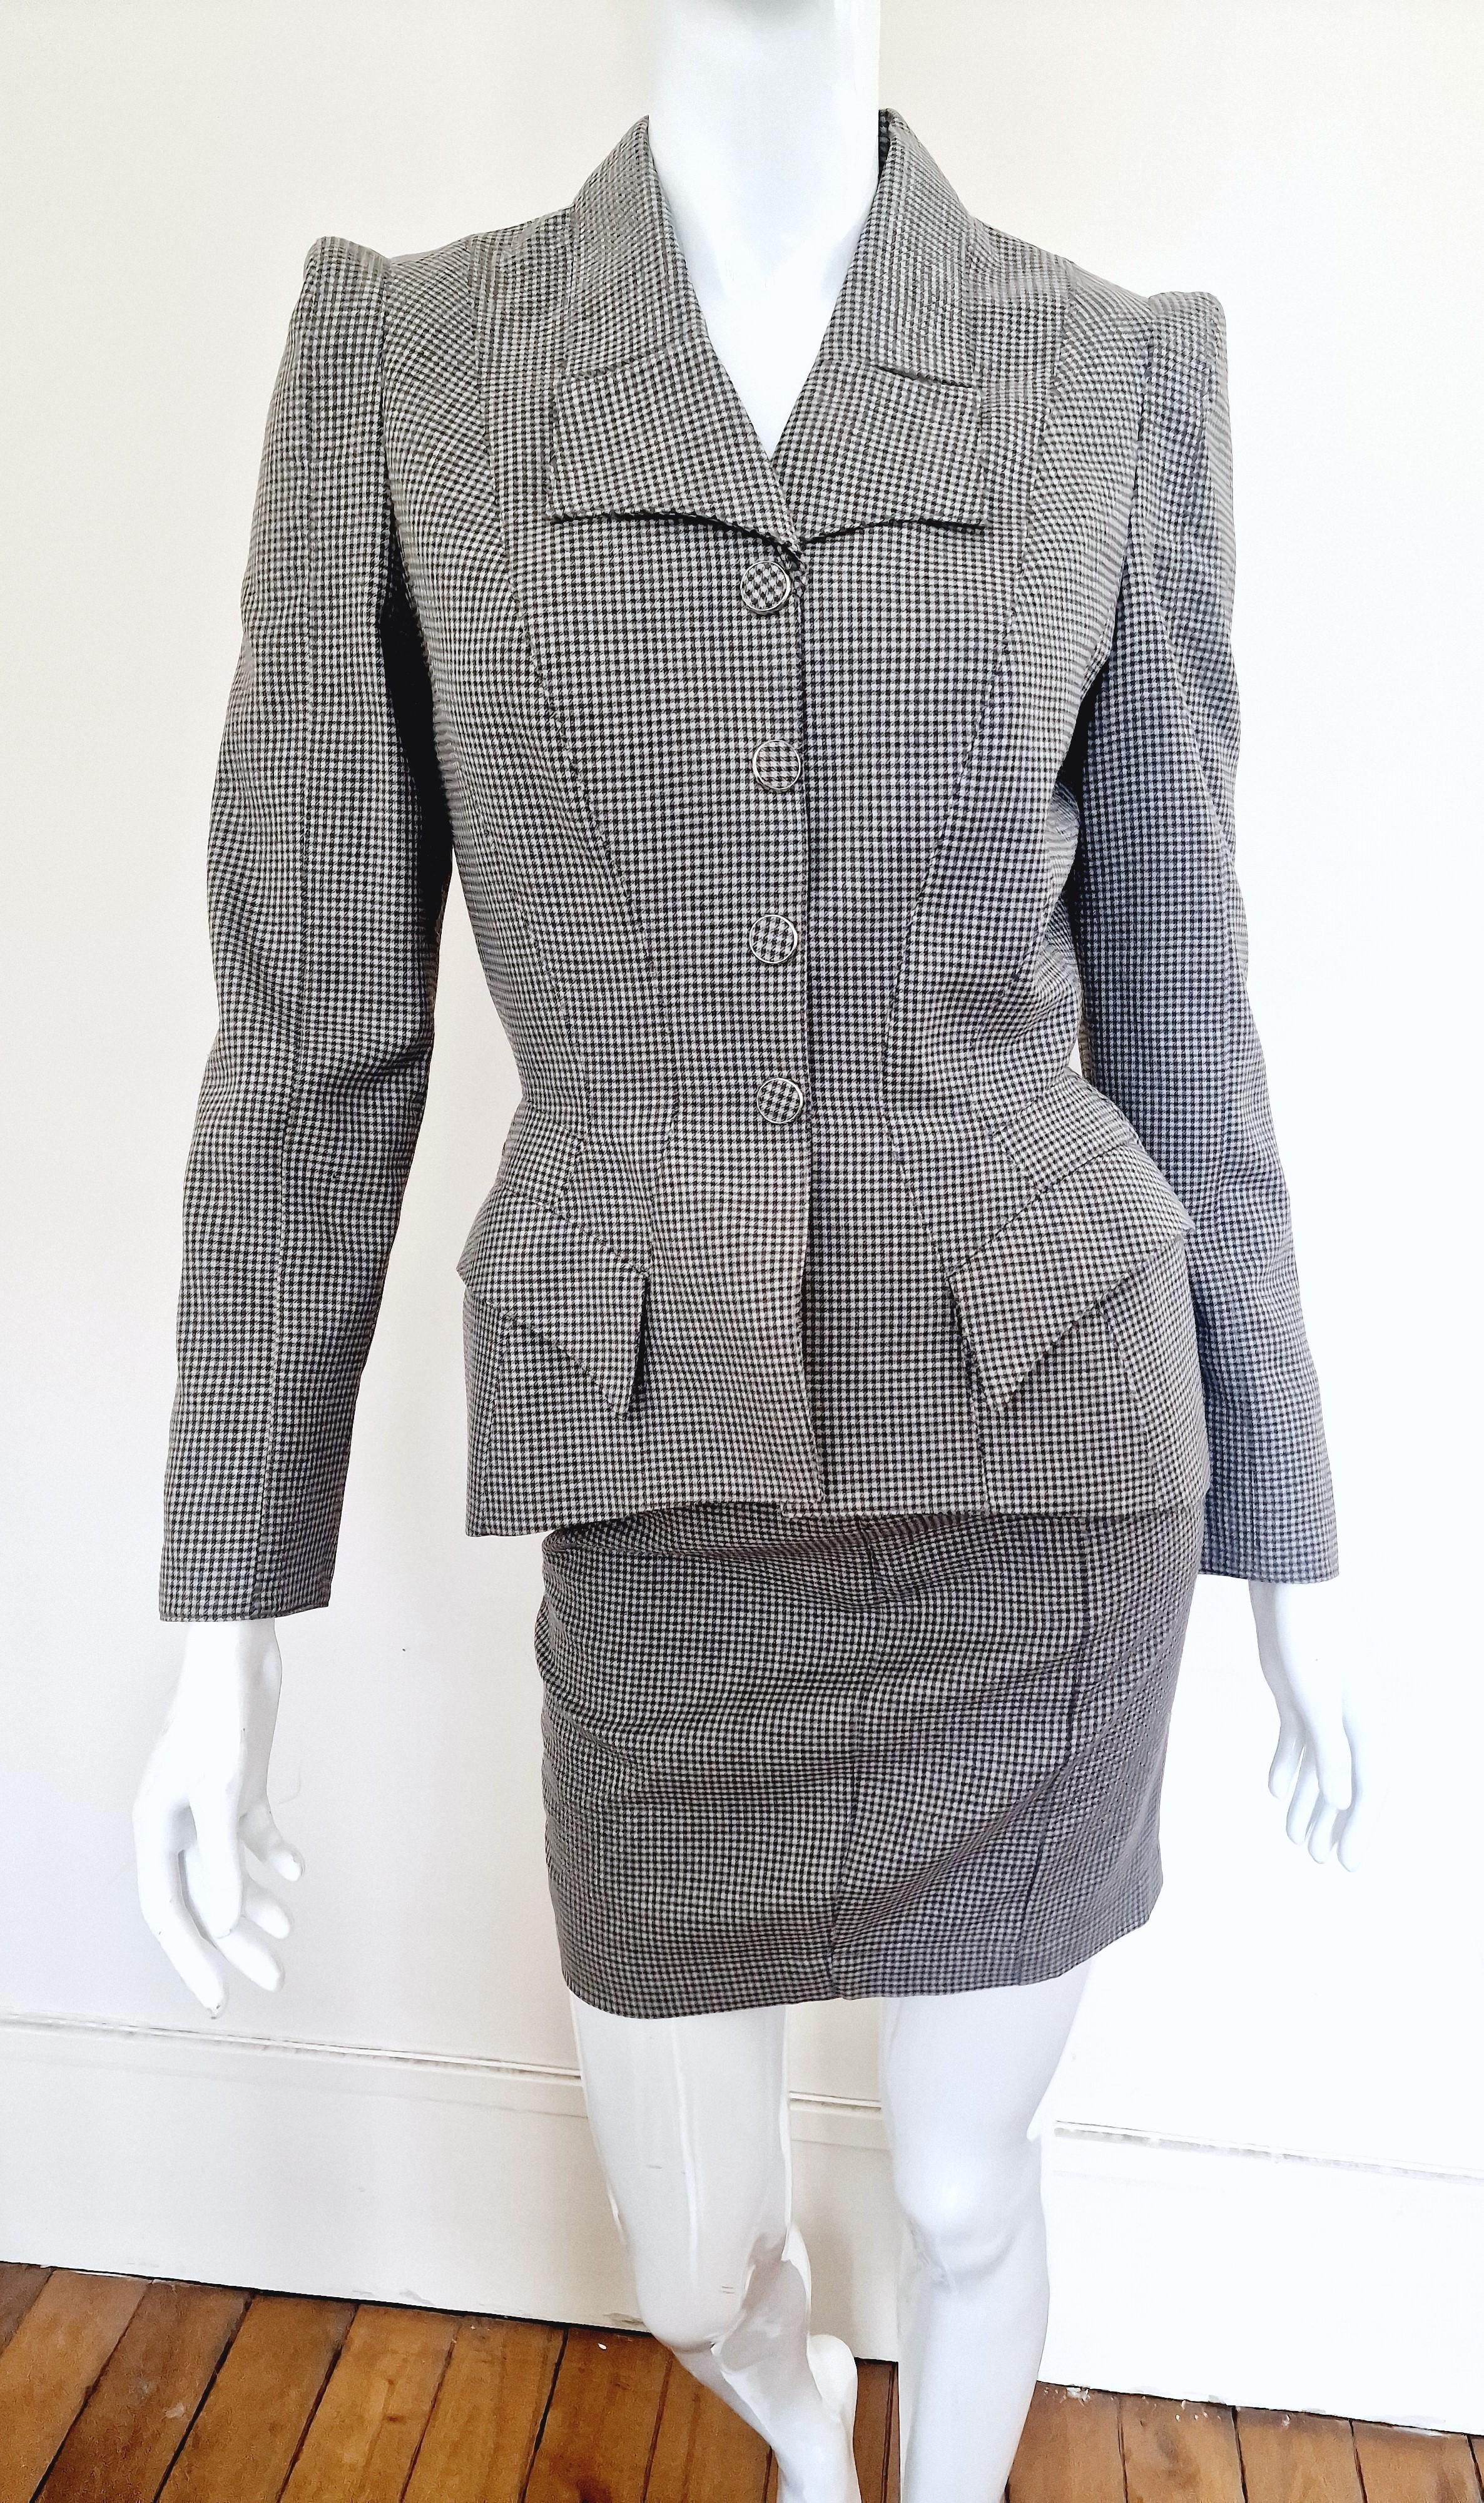 Thierry Mugler Houndstooth Check Evening Vampire XS Dress Set Jacket Skirt Suit For Sale 1